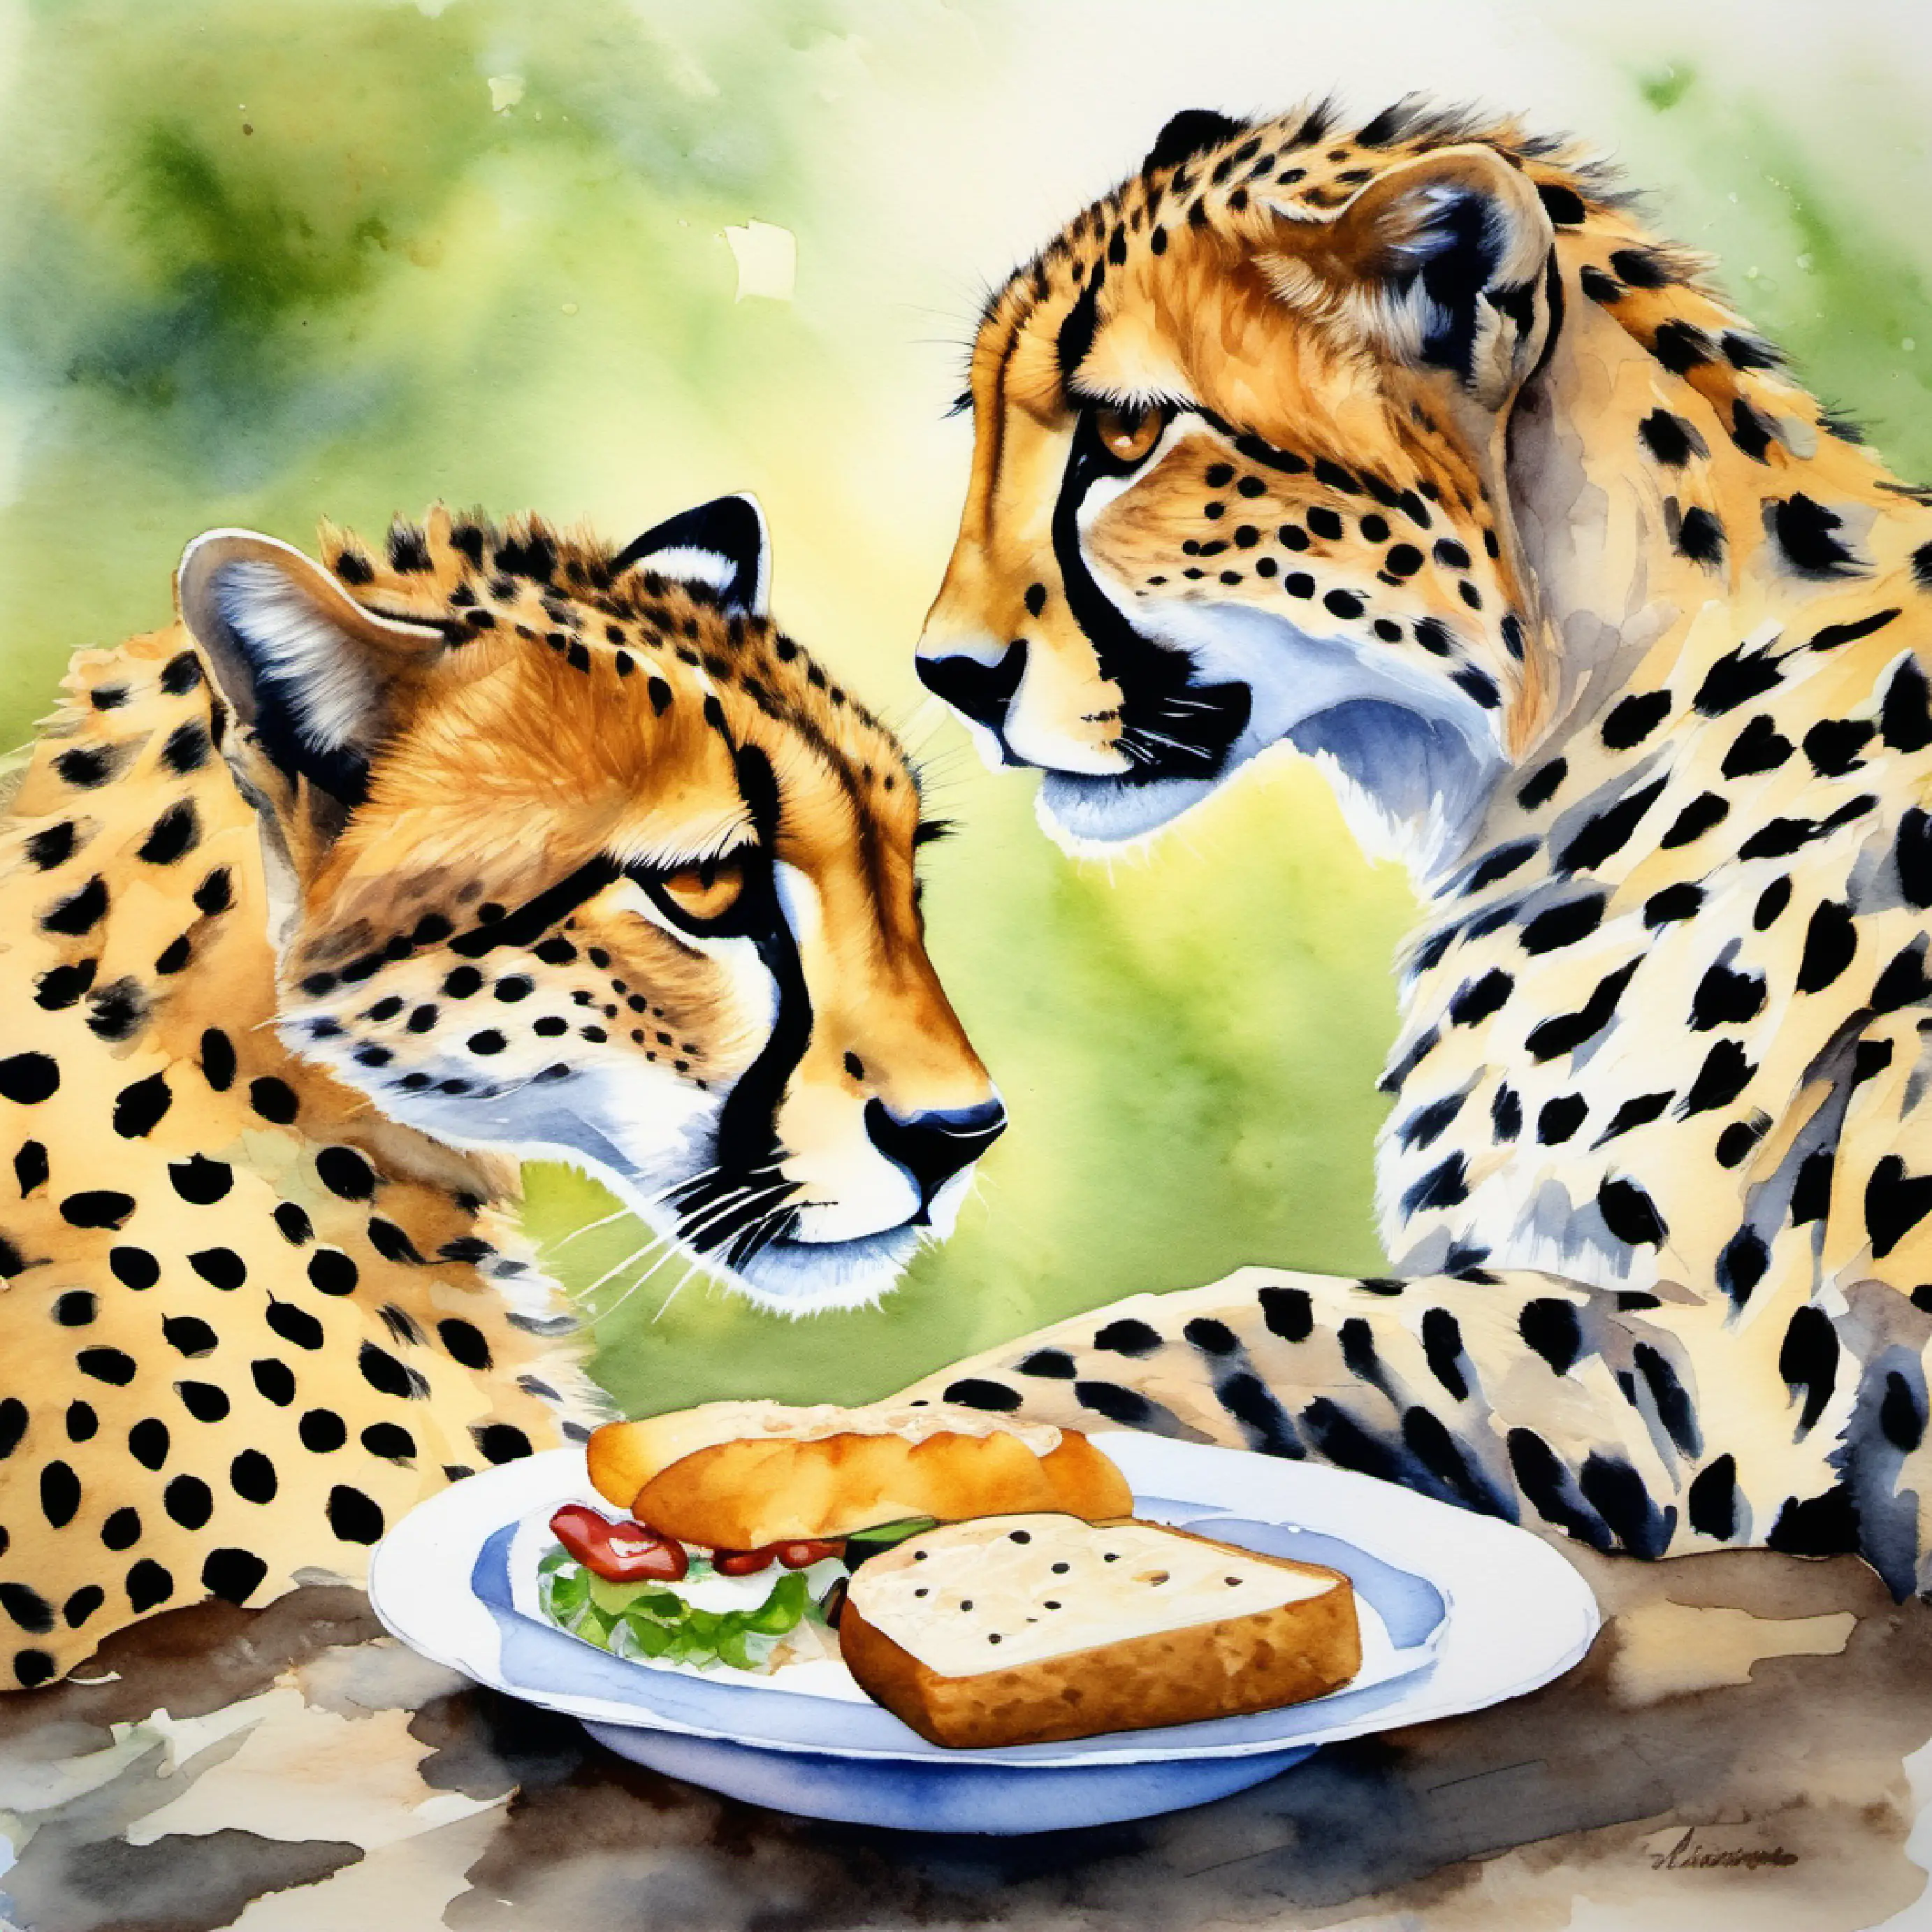 Sharing a meal, Spotted cheetah, agile, with alert golden eyes eating a sandwich.